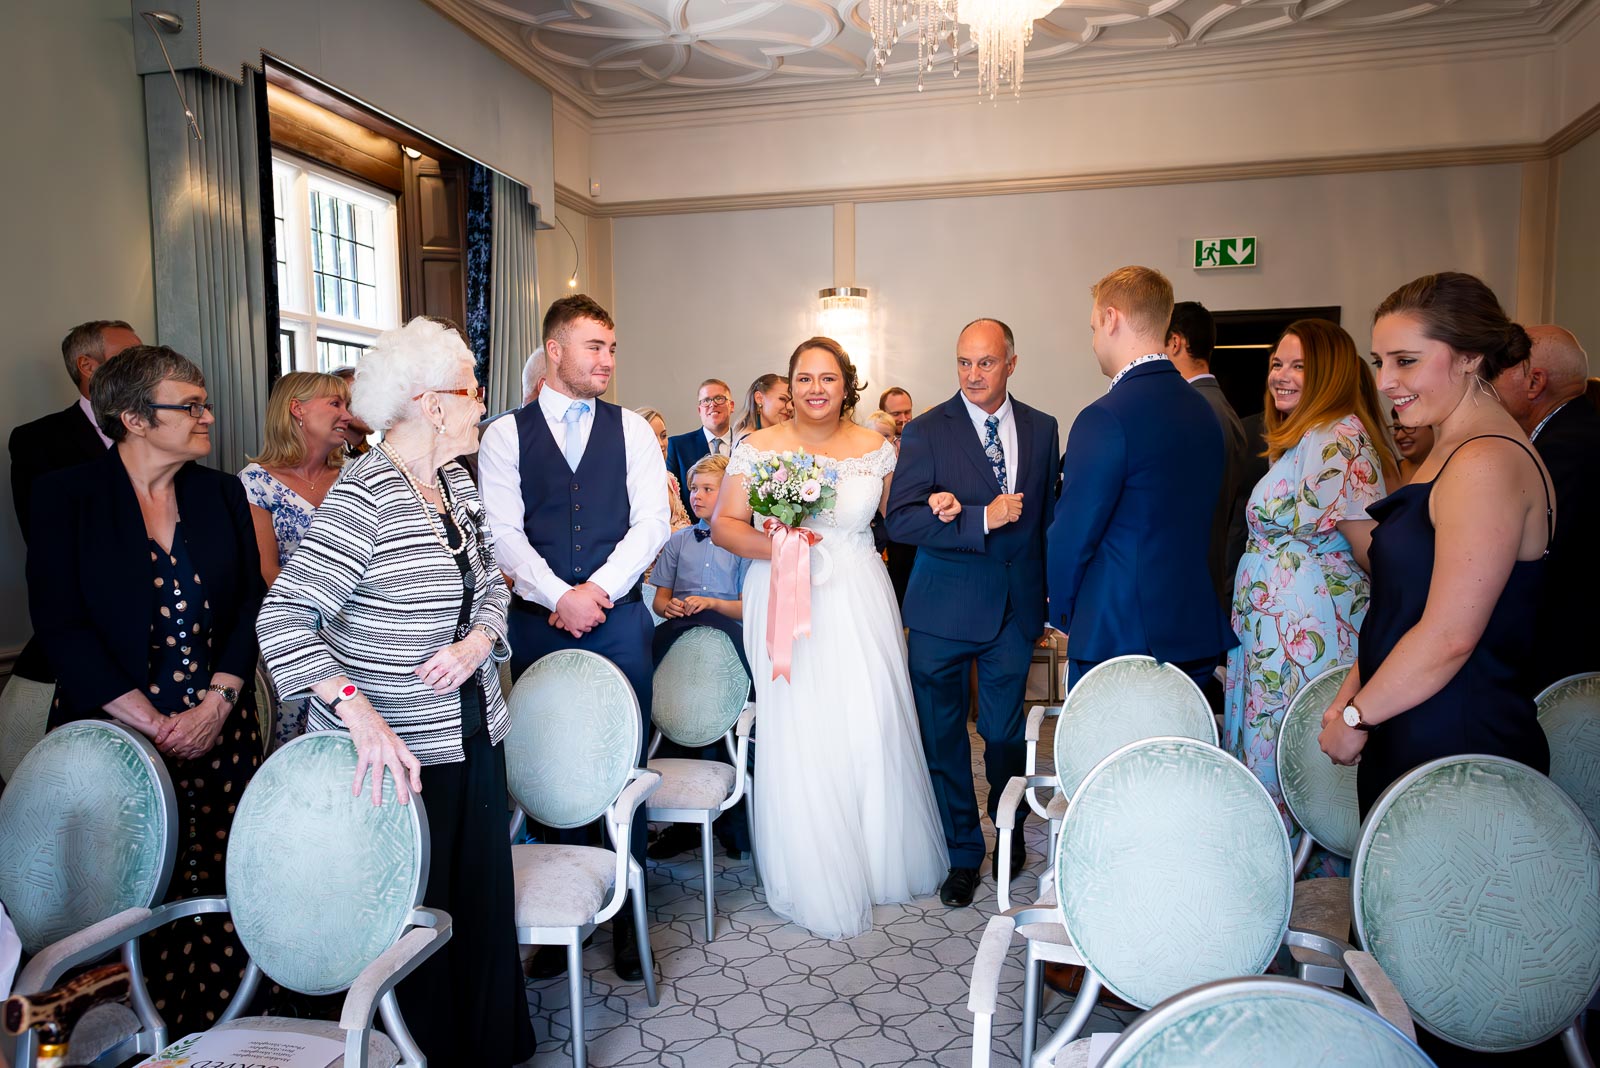 Amy walks down the aisle in the Ainsworth Room in Lewes Register Office with her father before her wedding to James.